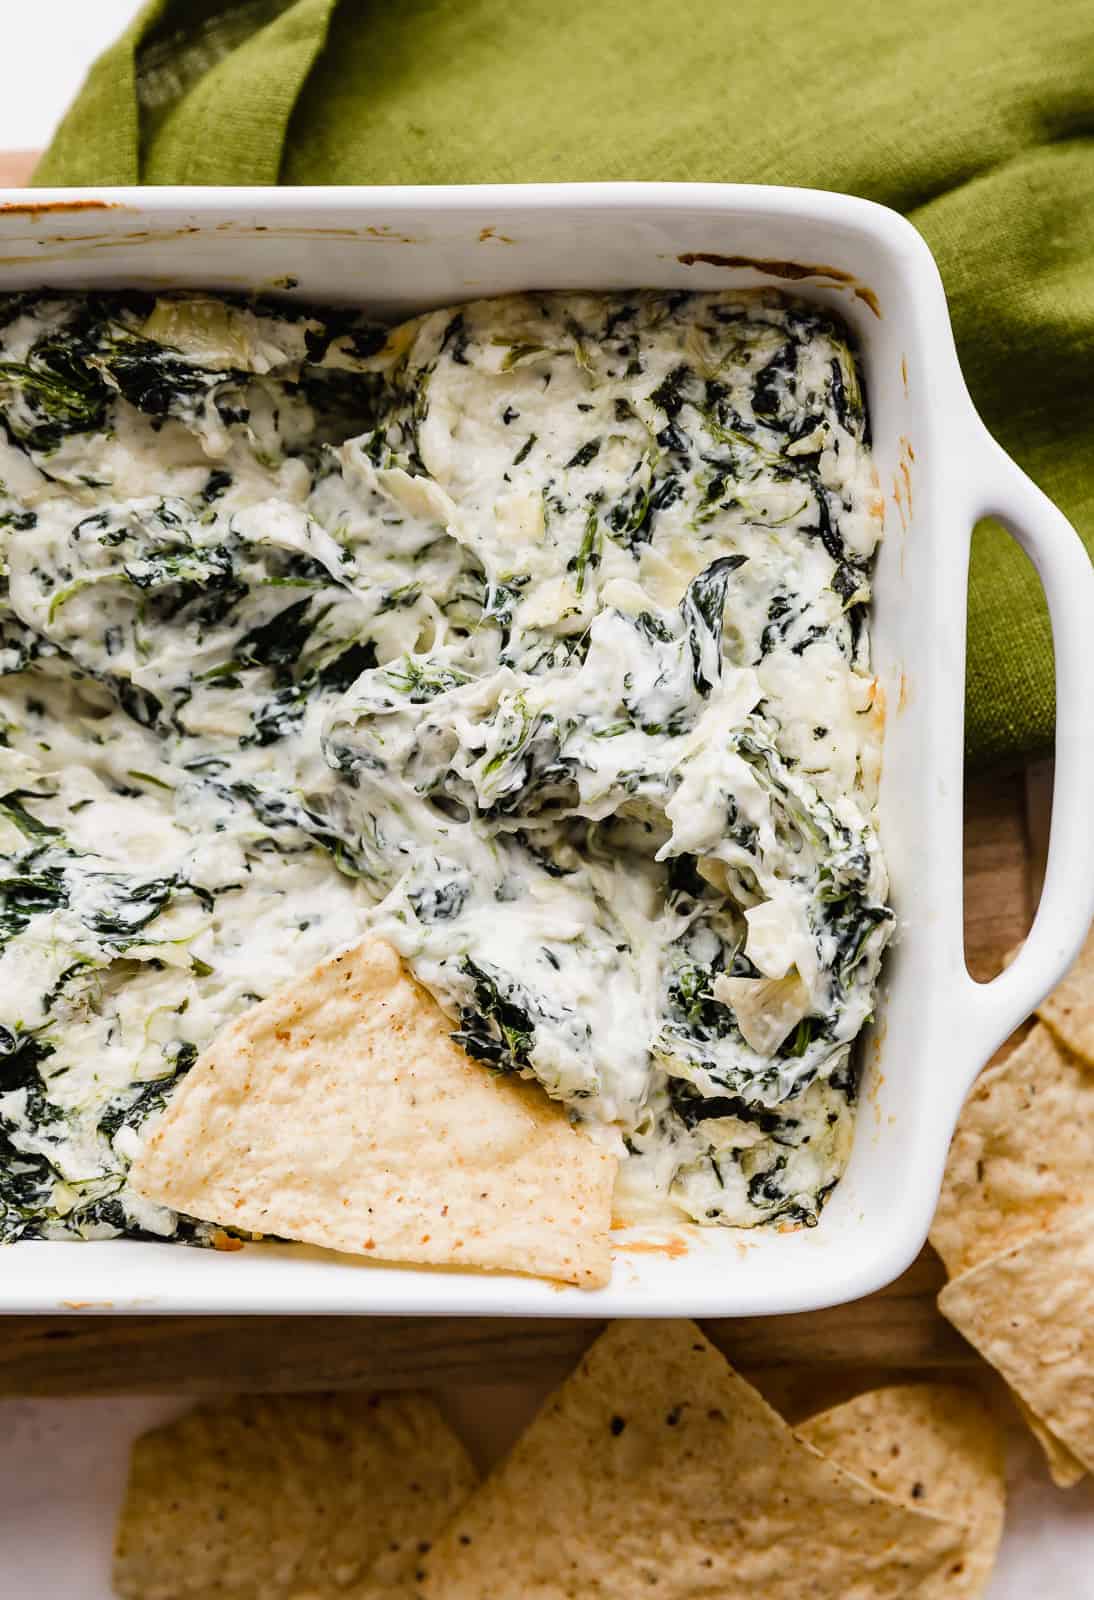 A chip dipped into warm spinach artichoke dip.